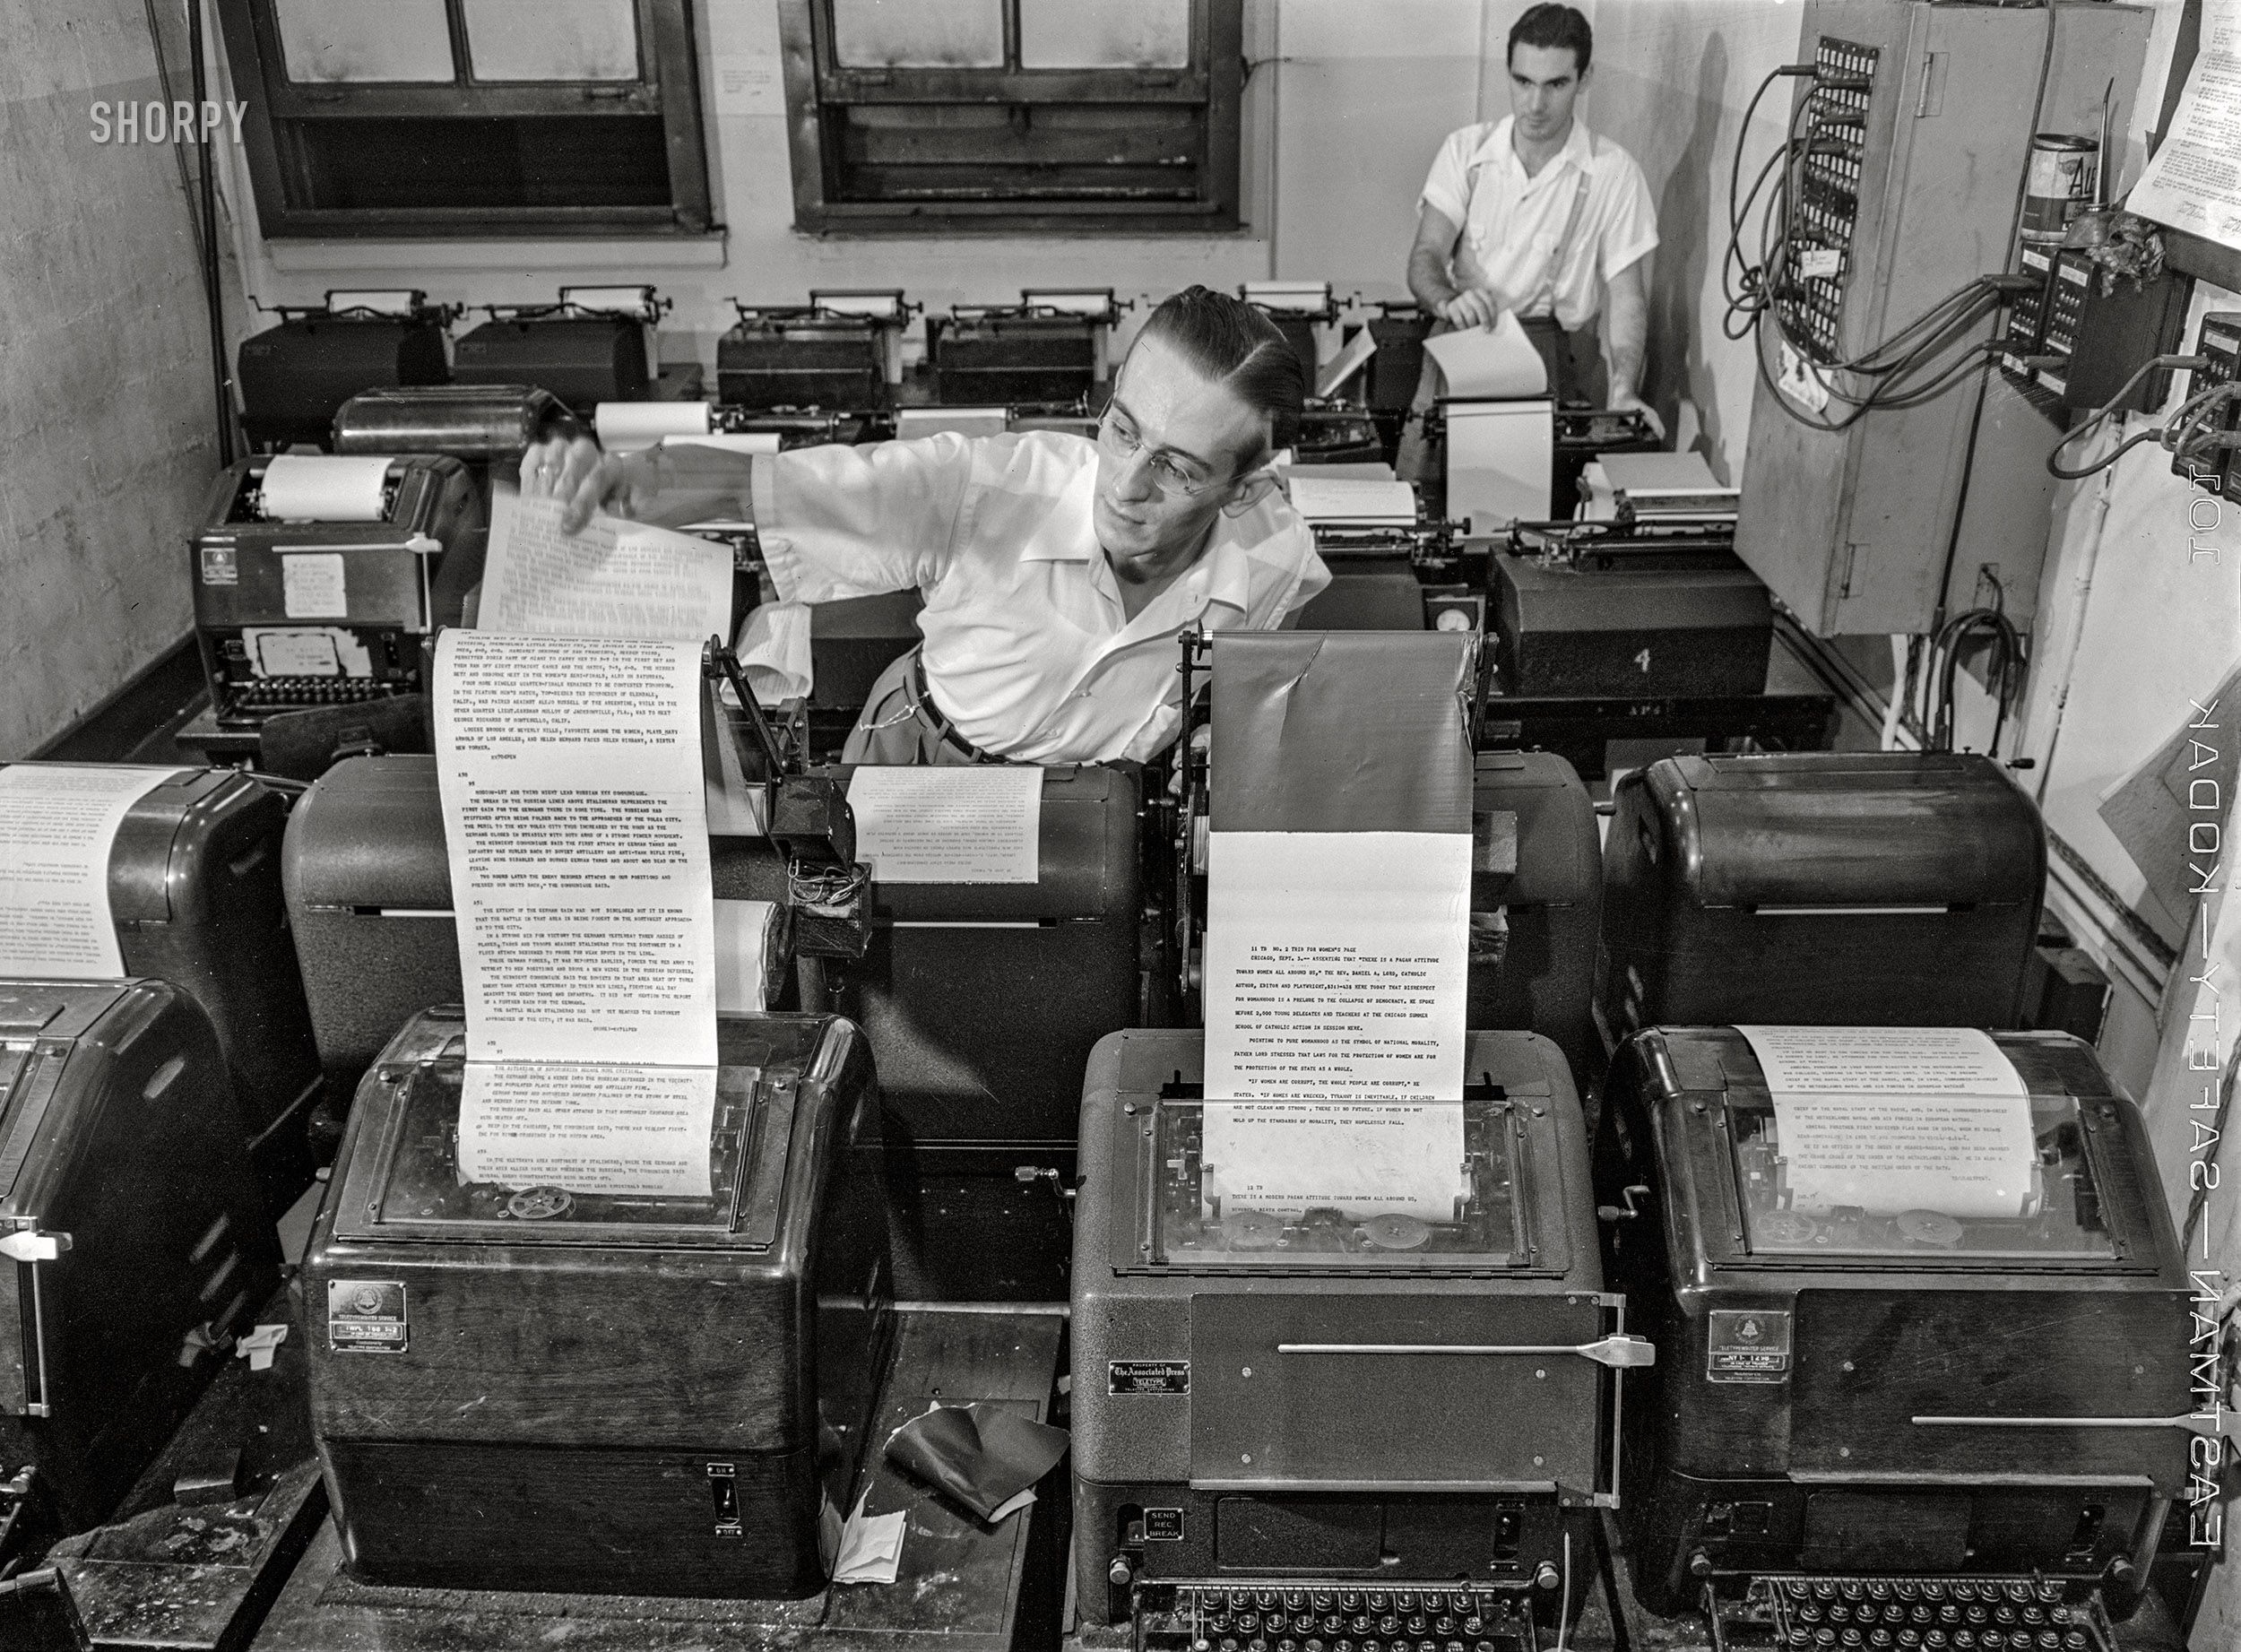 September 3, 1942. "New York, New York. Wire room of the New York Times newspaper. Copy boy about to tear off dispatch from the Associated Press wire." Medium format acetate negative by Marjory Collins for the Office of War Information. View full size.